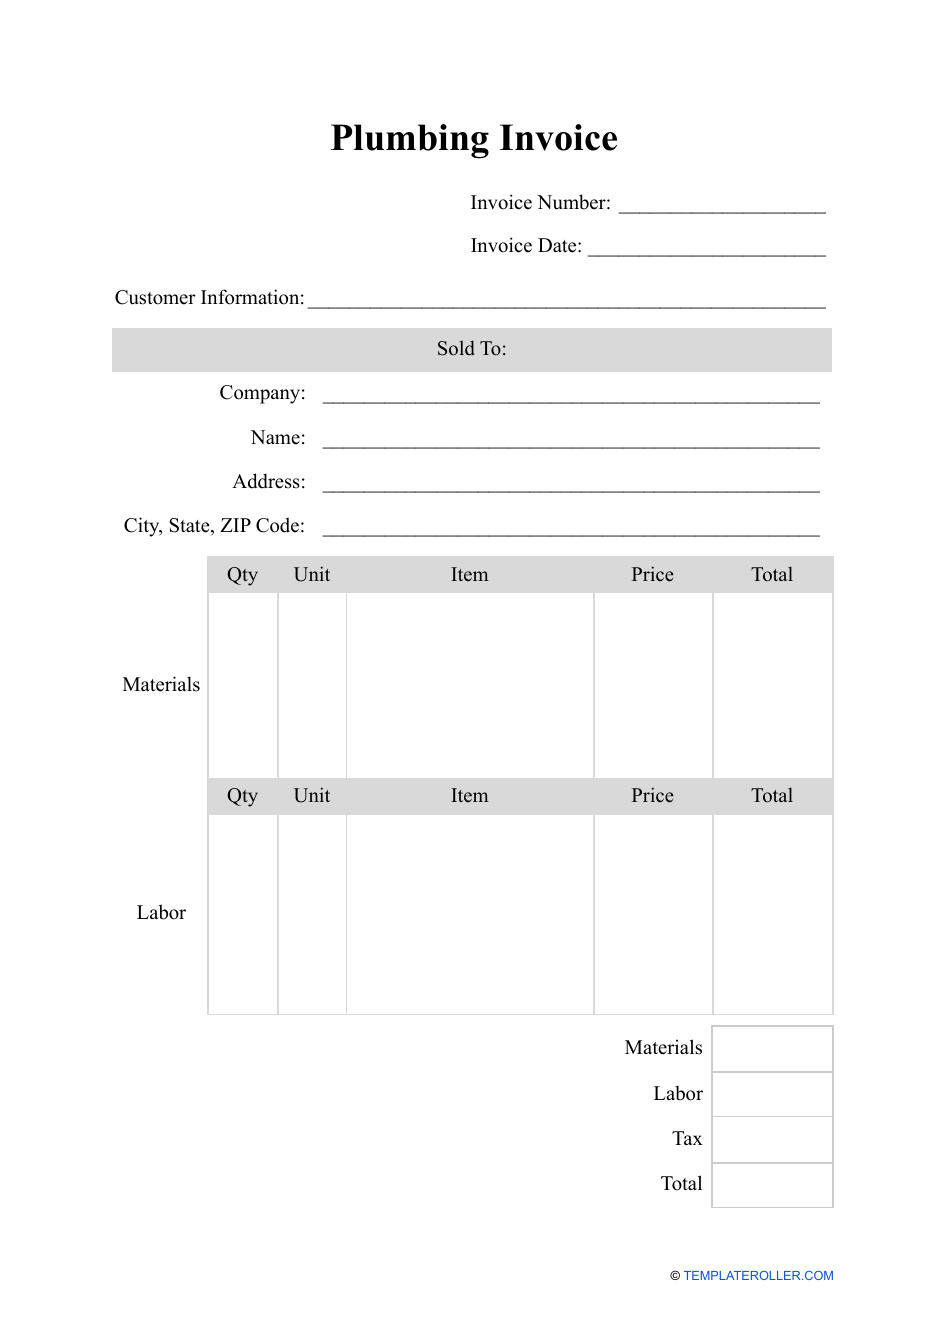 Plumbing Invoice Template, Page 1